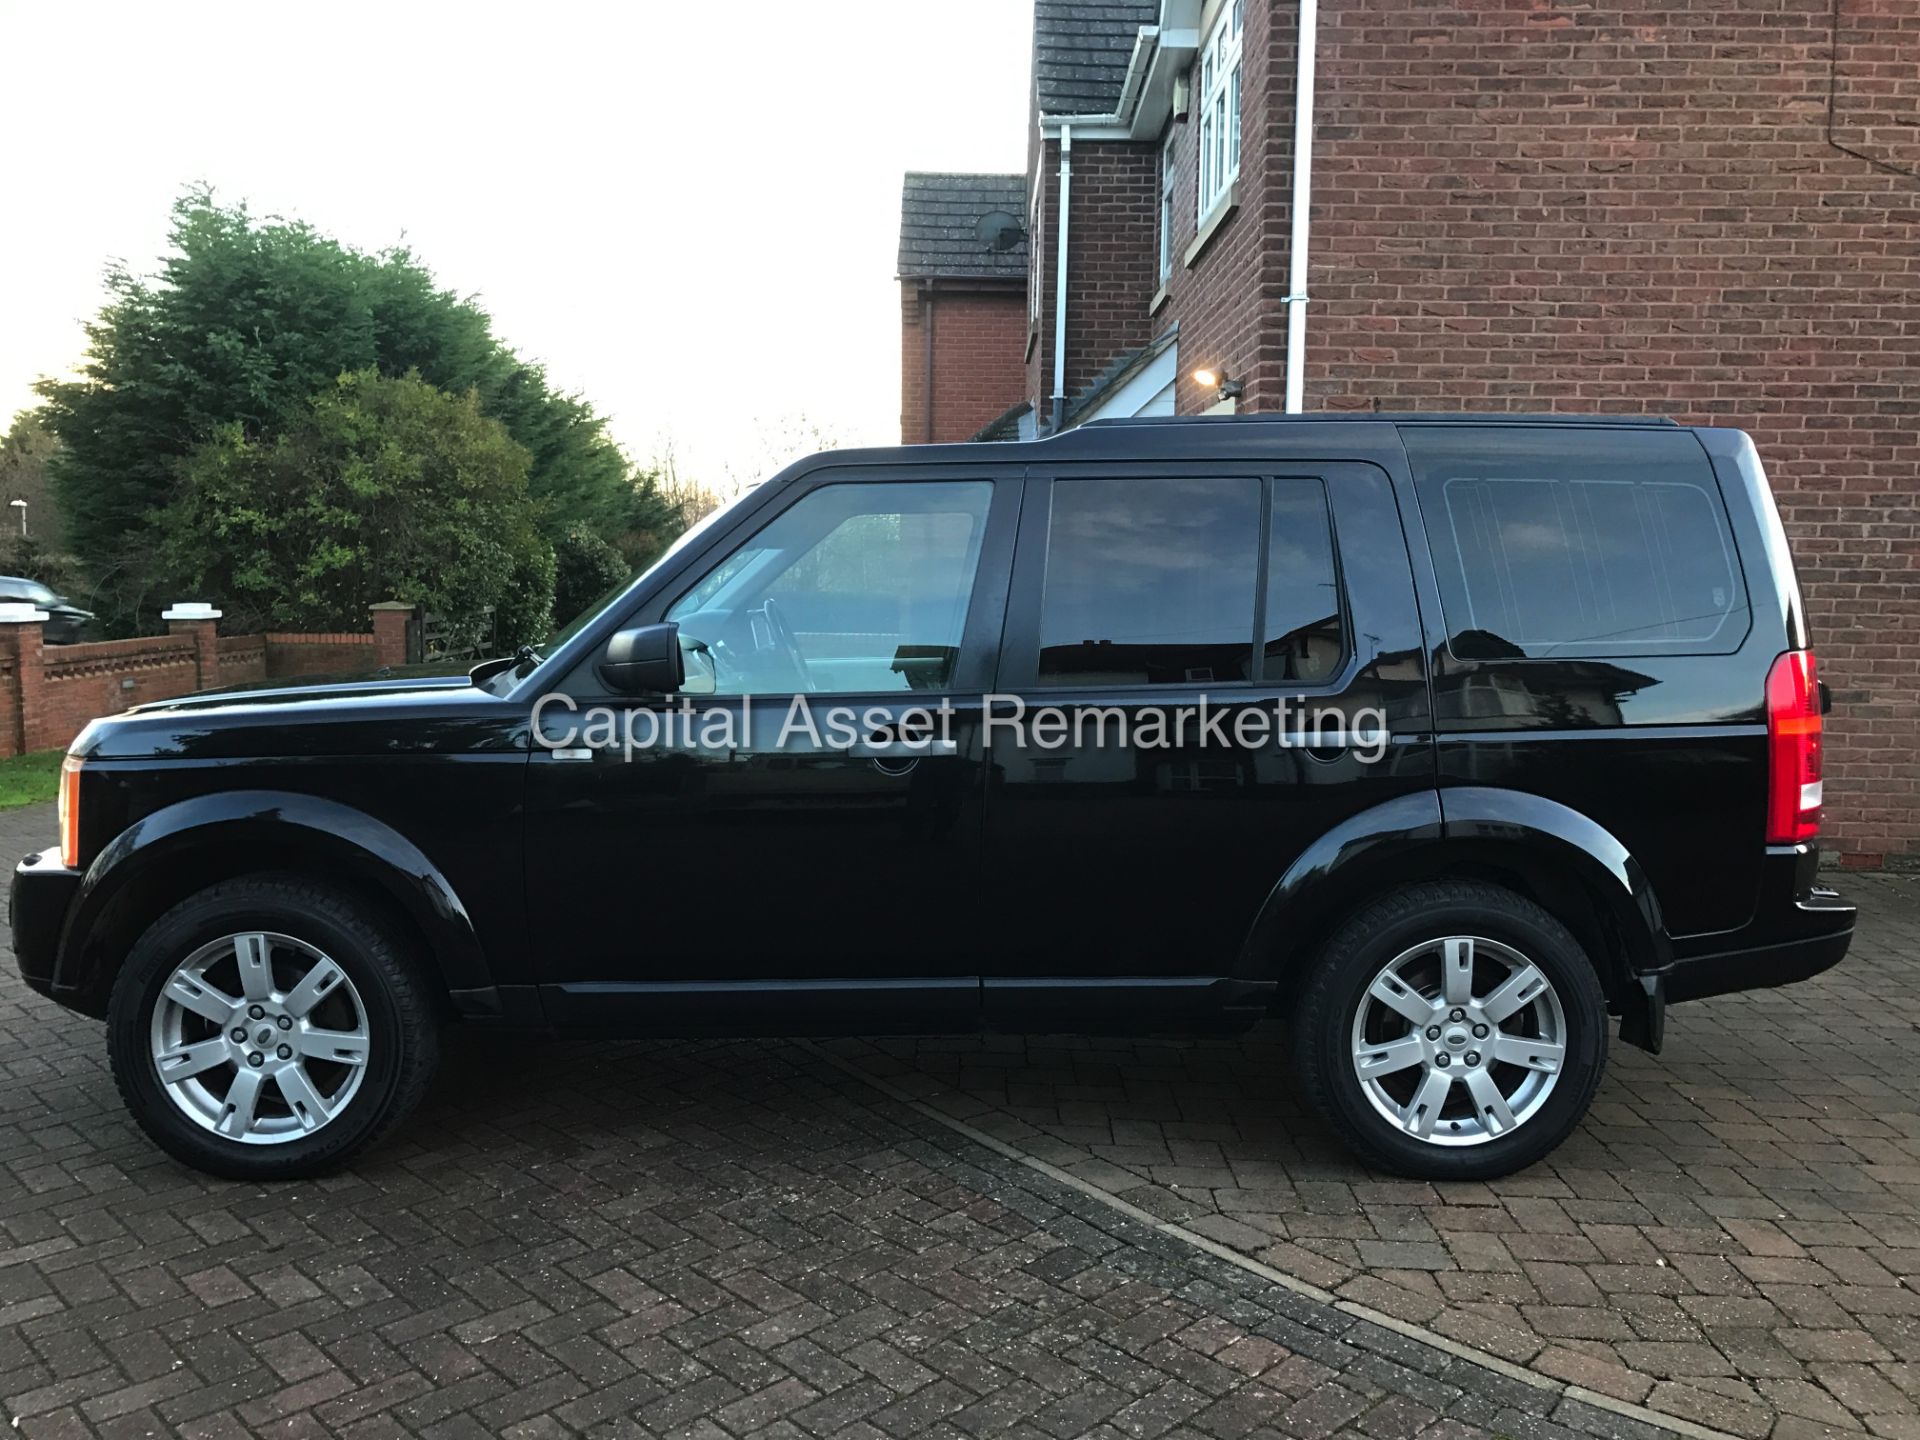 LANDROVER DISCOVERY 3 "TDV6" AUTO - (BLACK EDITION) - 09 REG - SAT NAV - LEATHER - 7 SEATER - WOW!! - Image 8 of 30